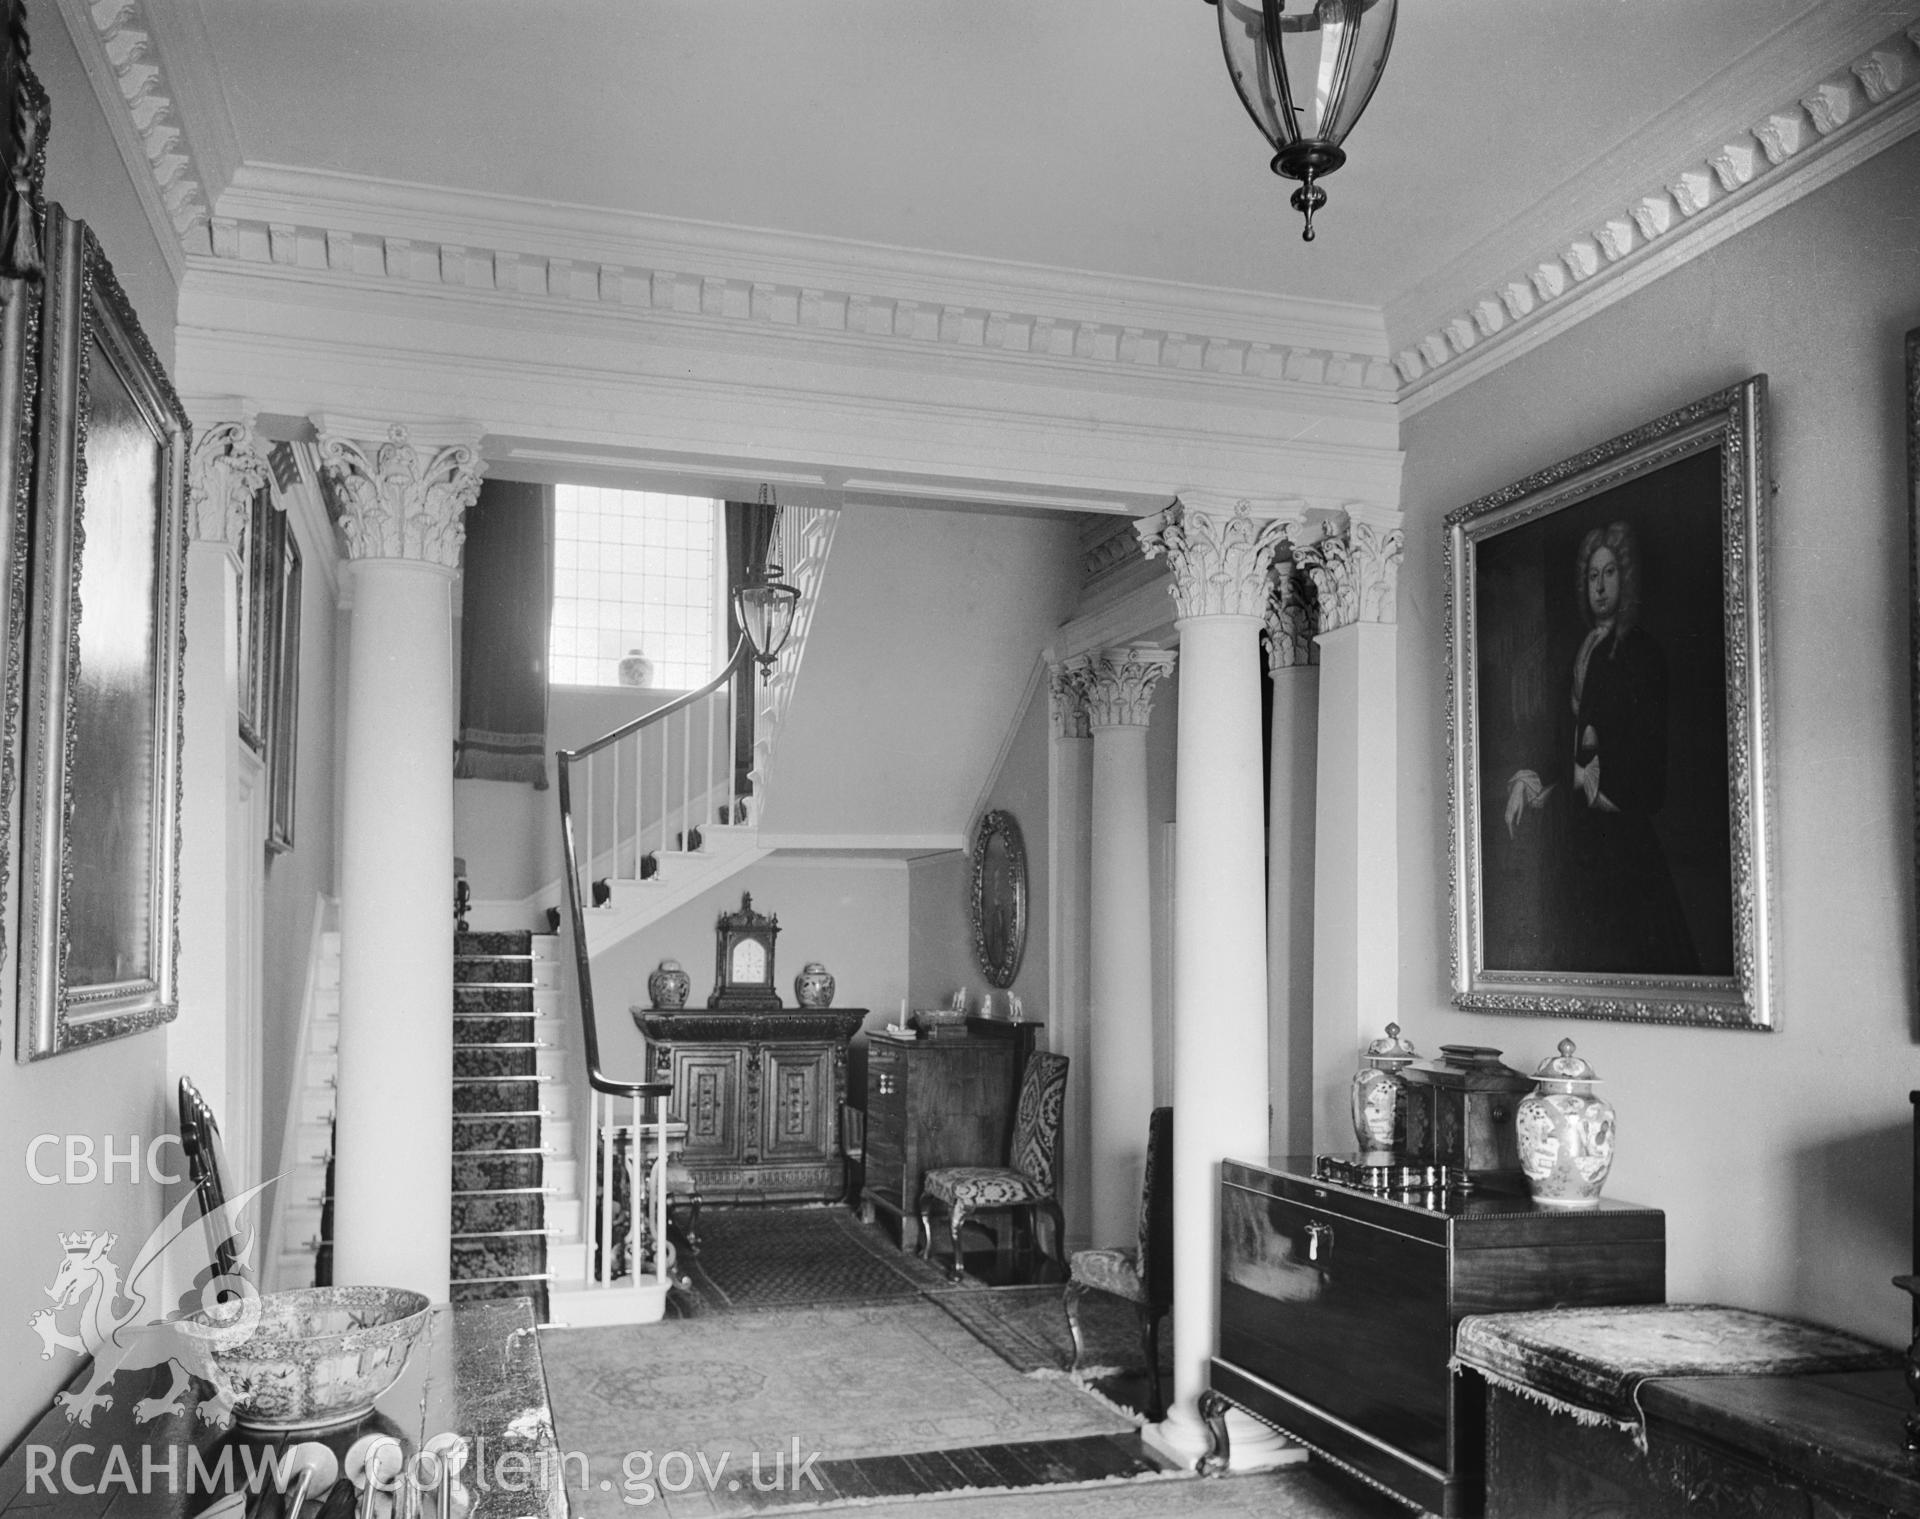 Interior view showing the entrance hall and staircase.